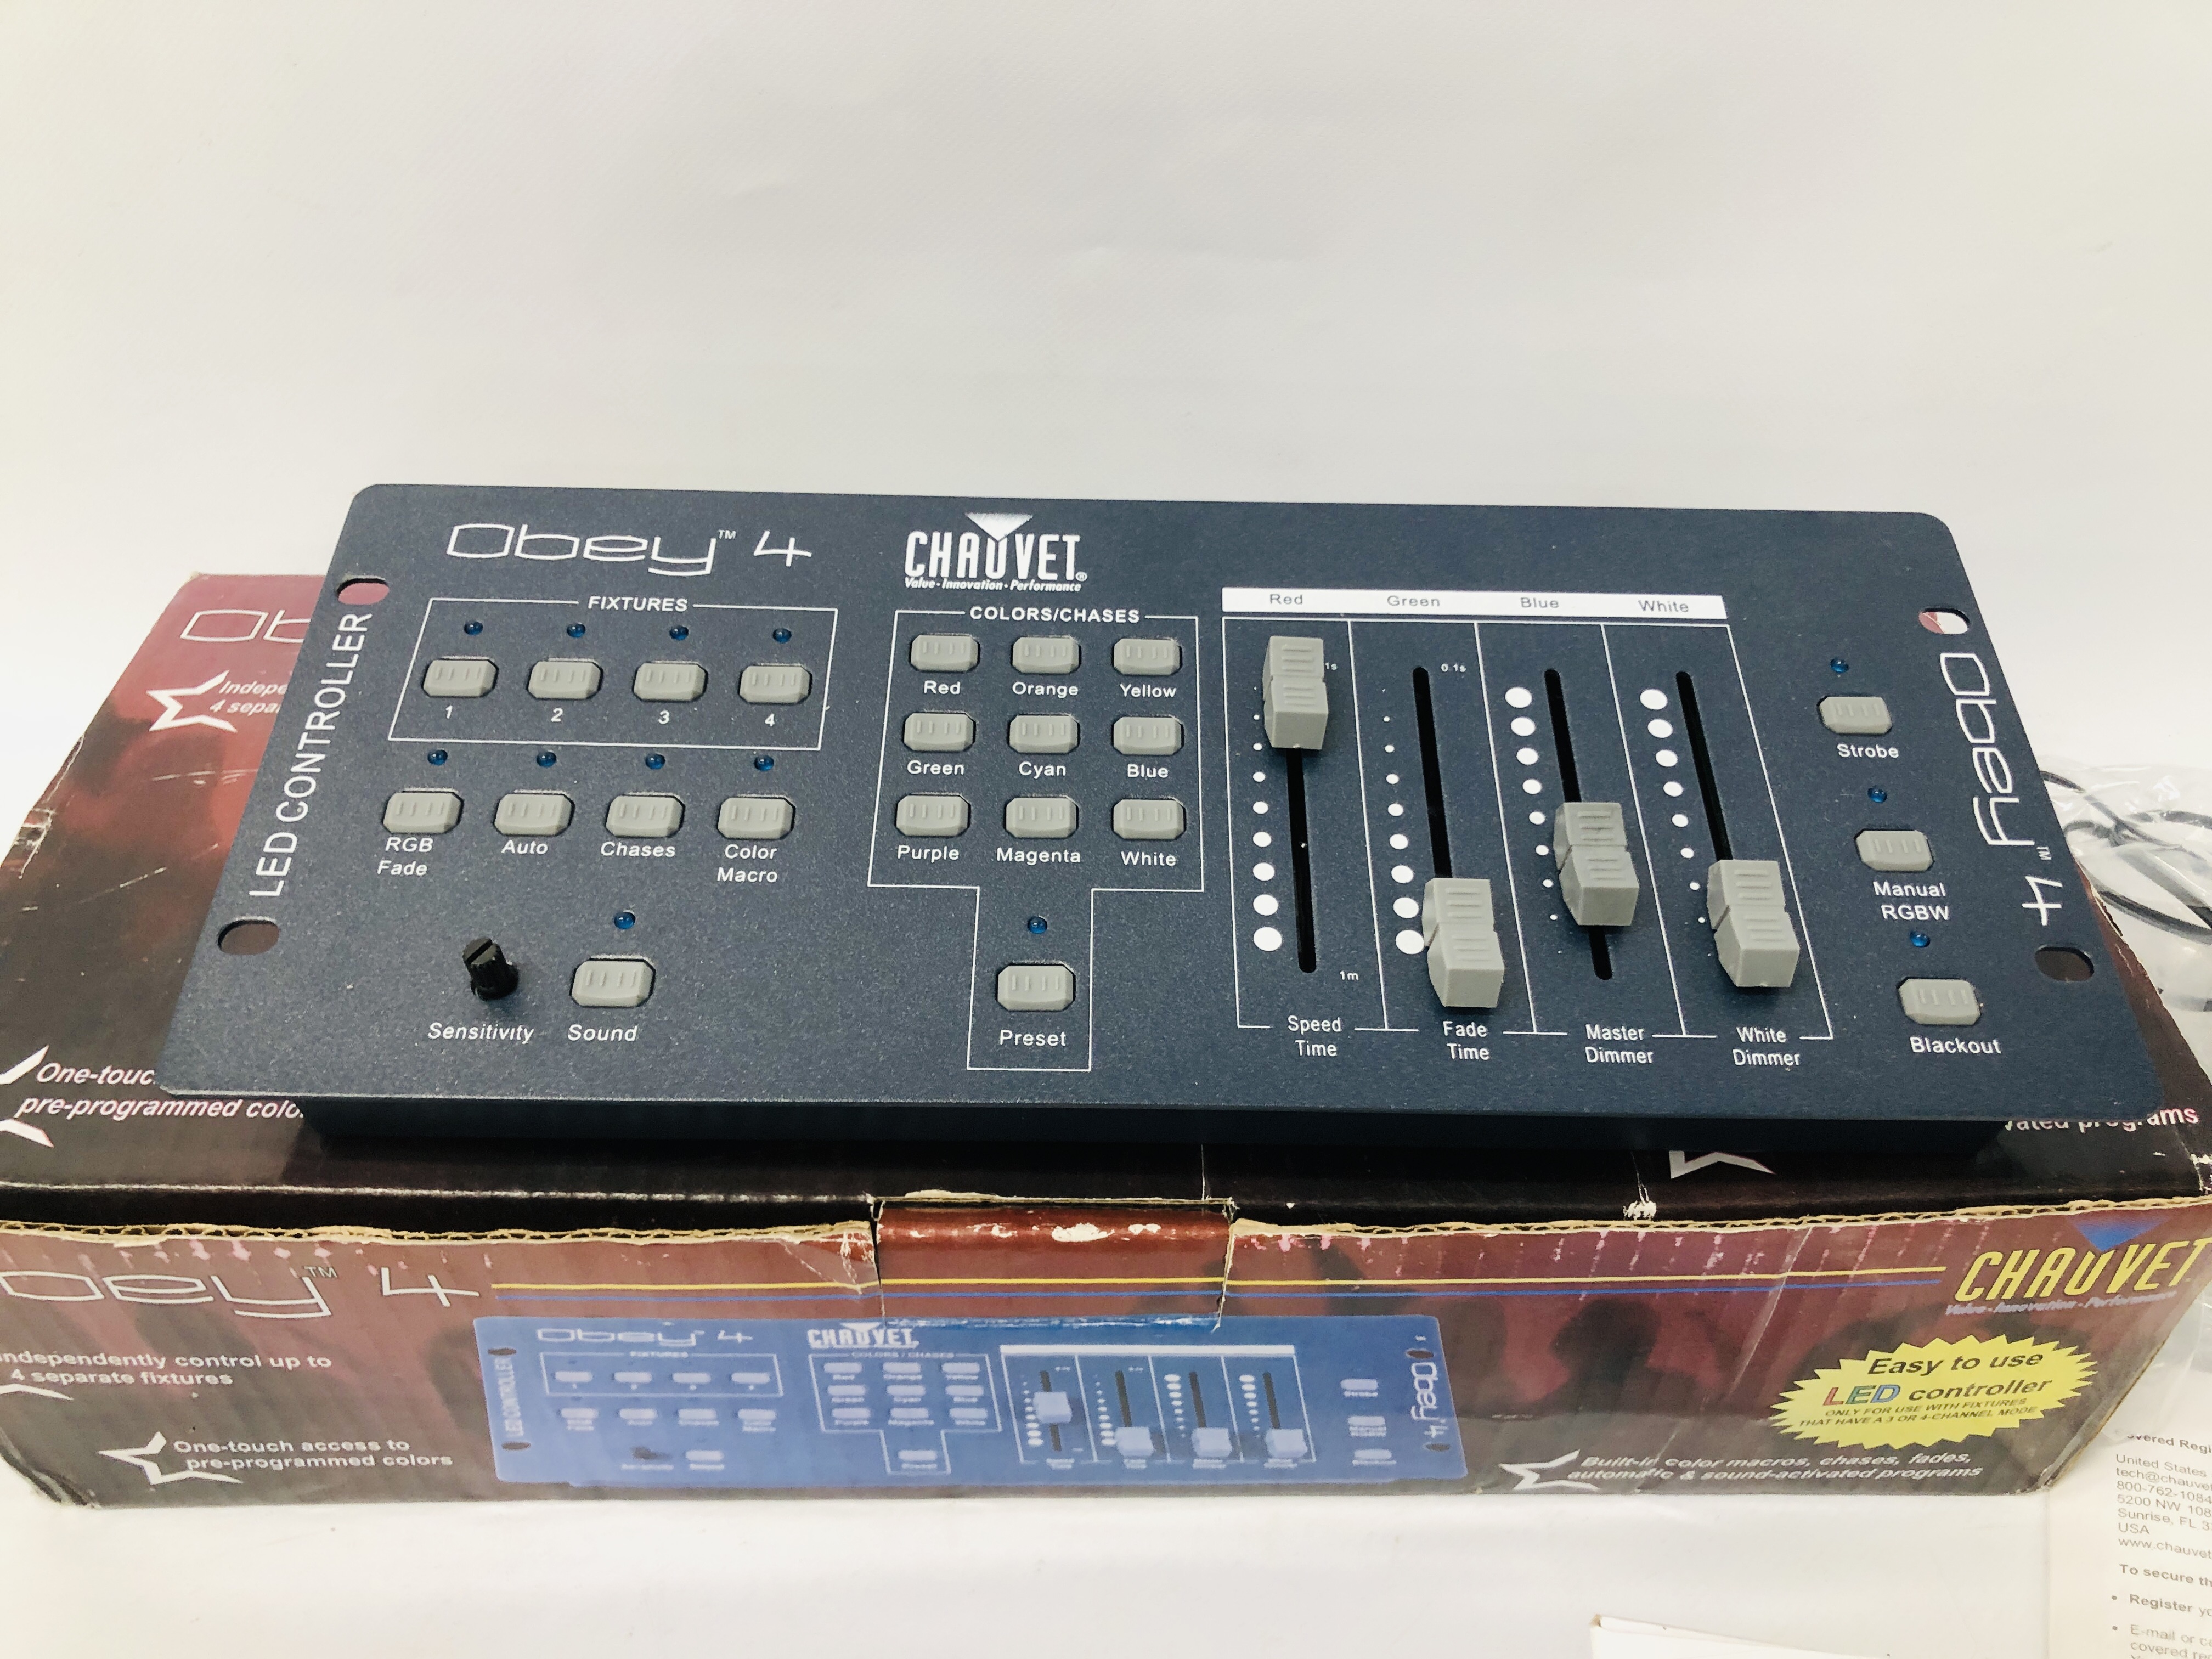 A KAM DMX3 LIGHTING CONTROLLER ALONG WITH A CHAUVET OBEY4 LIGHTING CONTROLLER - SOLD AS SEEN - Image 4 of 6